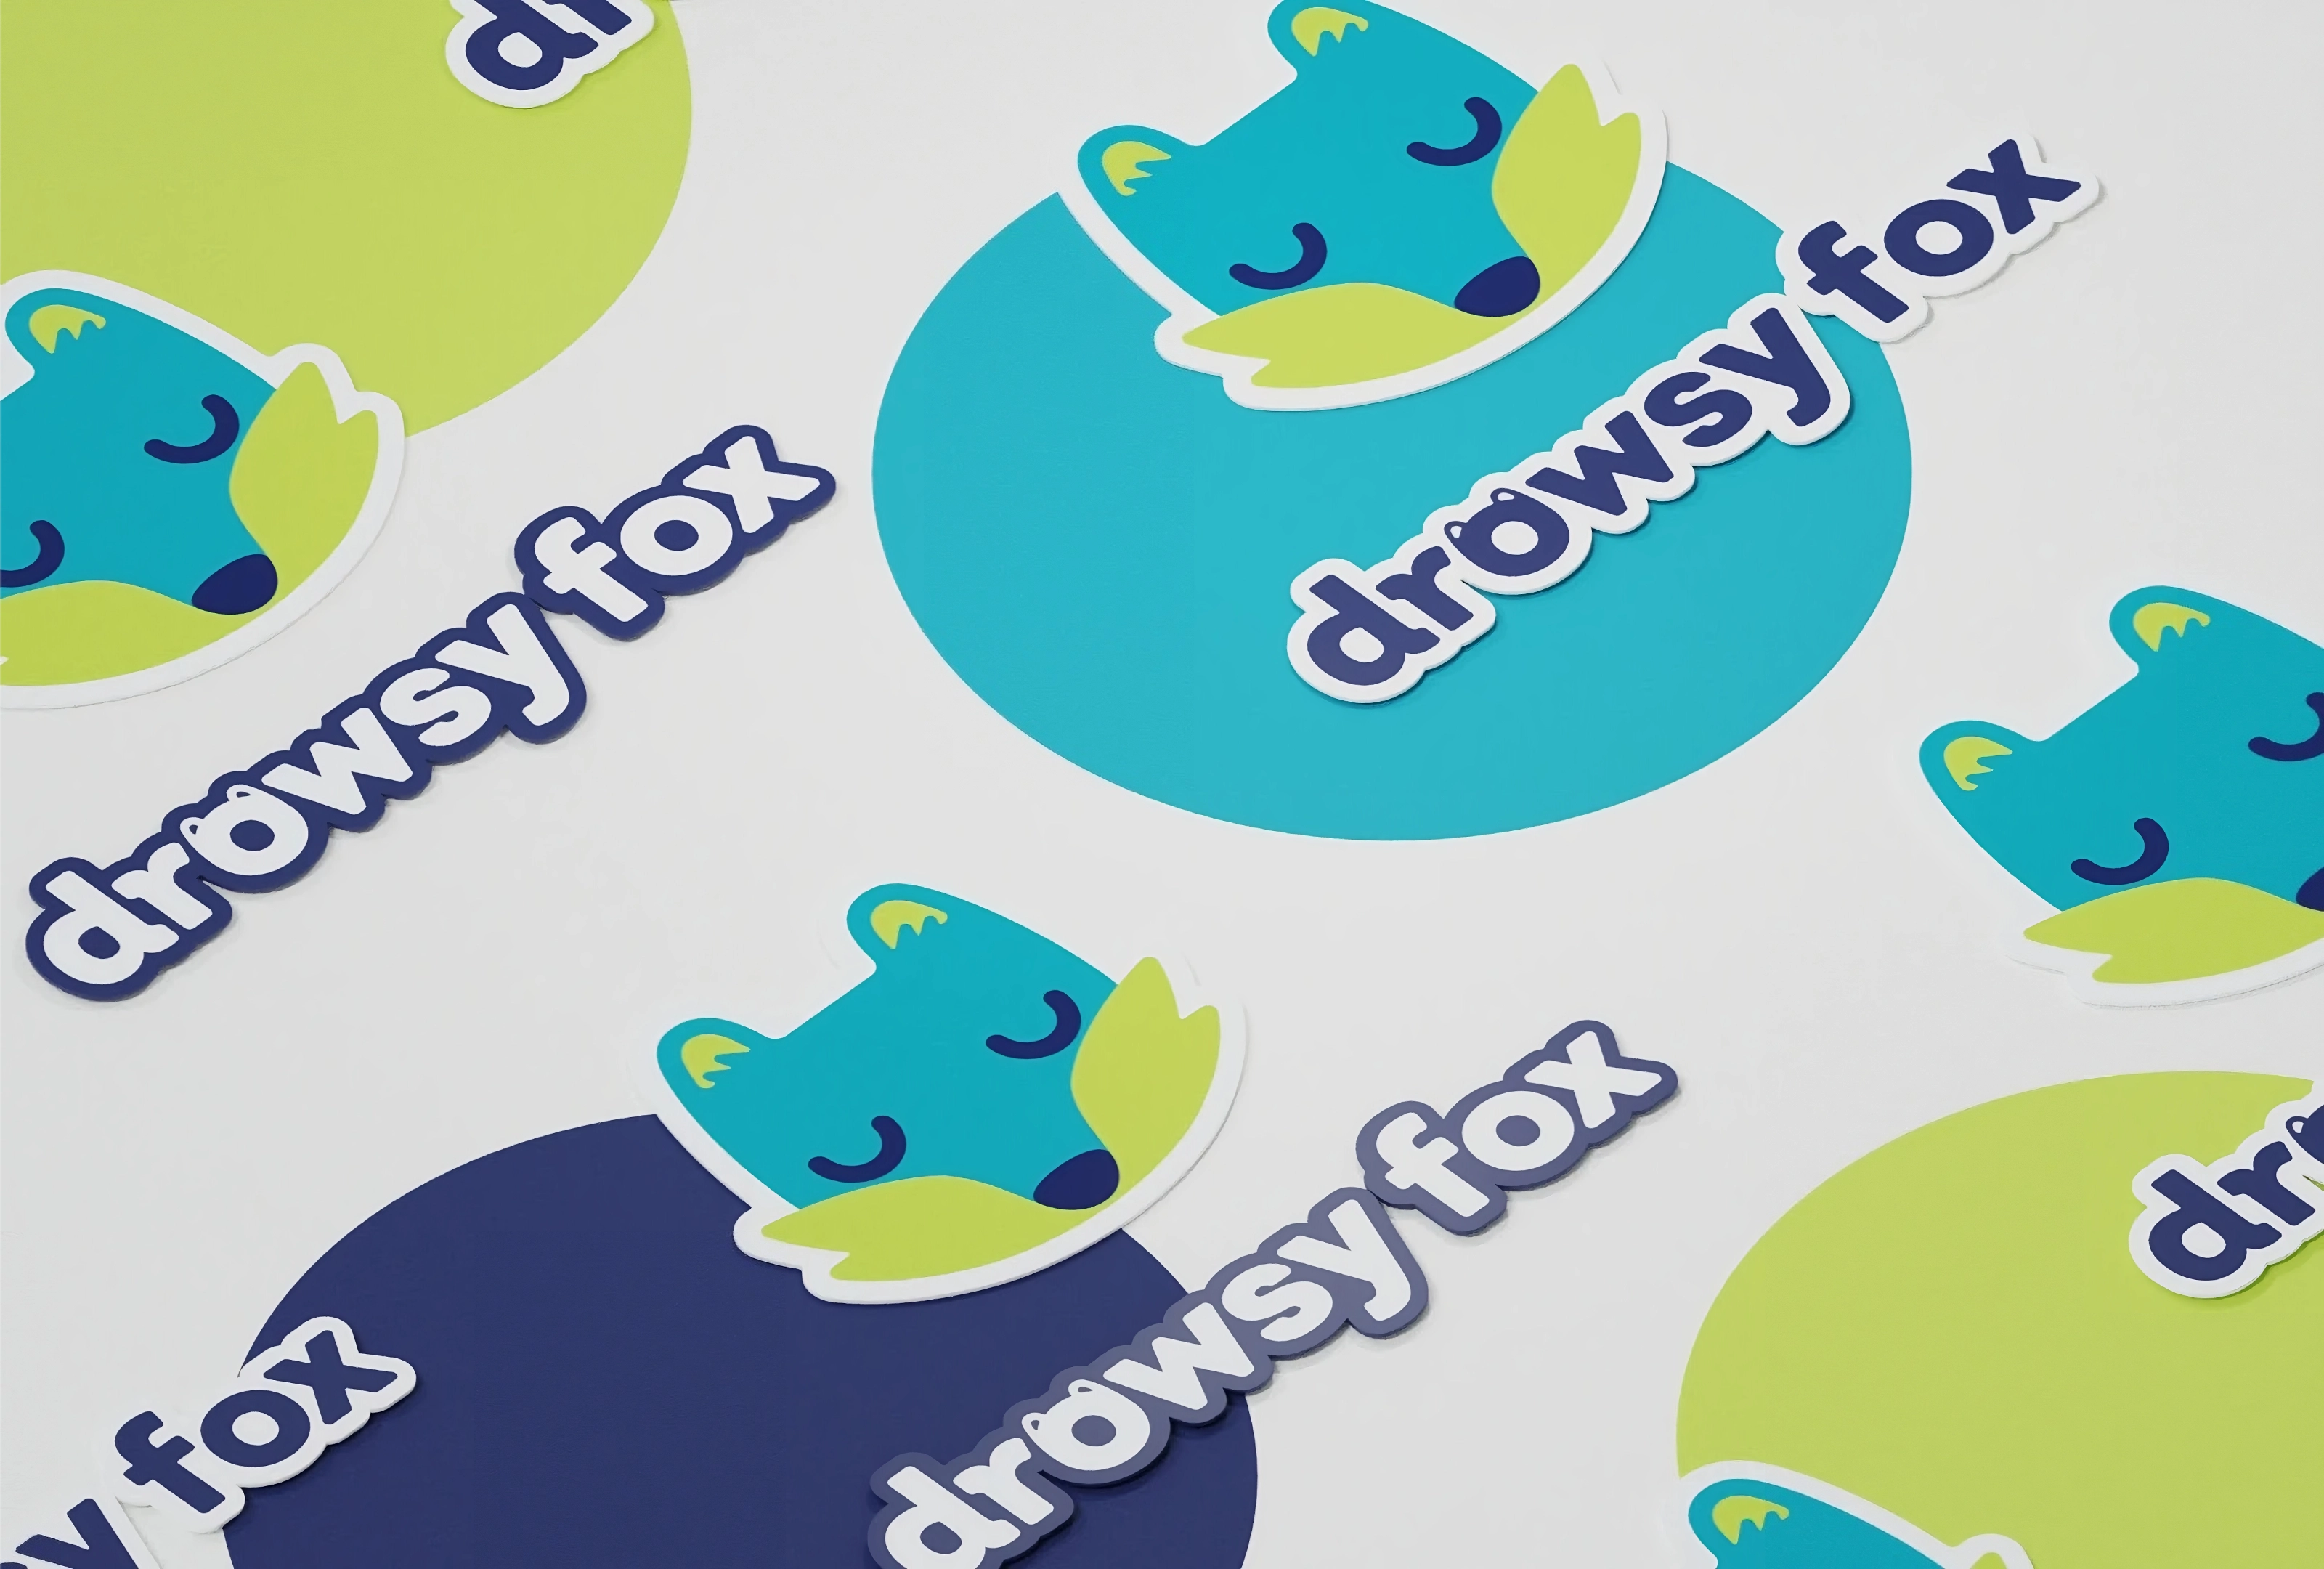 stickers featuring the drowsy fox logo and its logotype 